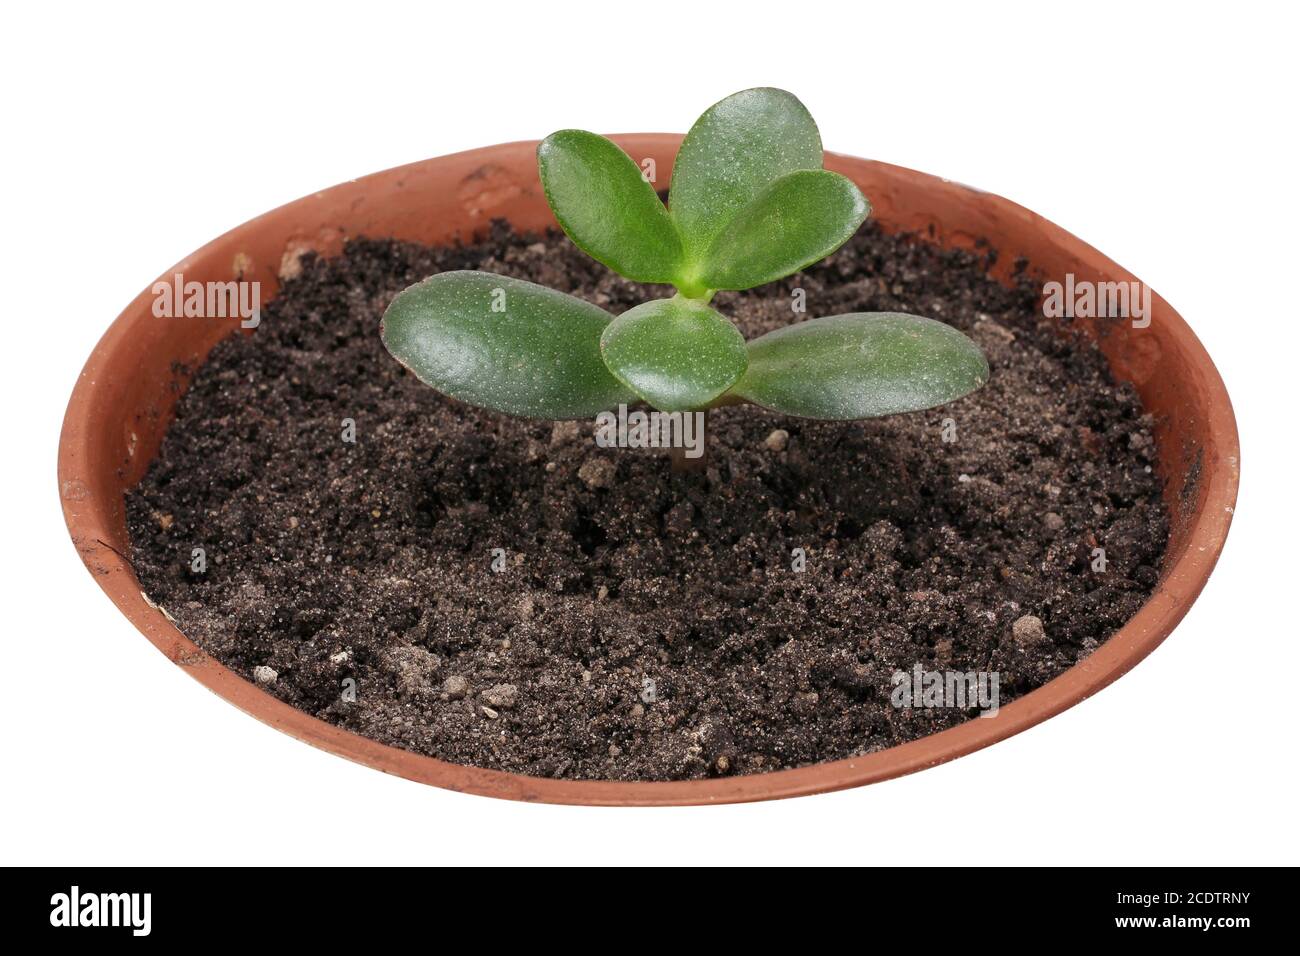 The exotic tropical indoor plant Money Tree  begins the life in the ceramic pot with soil. Stock Photo